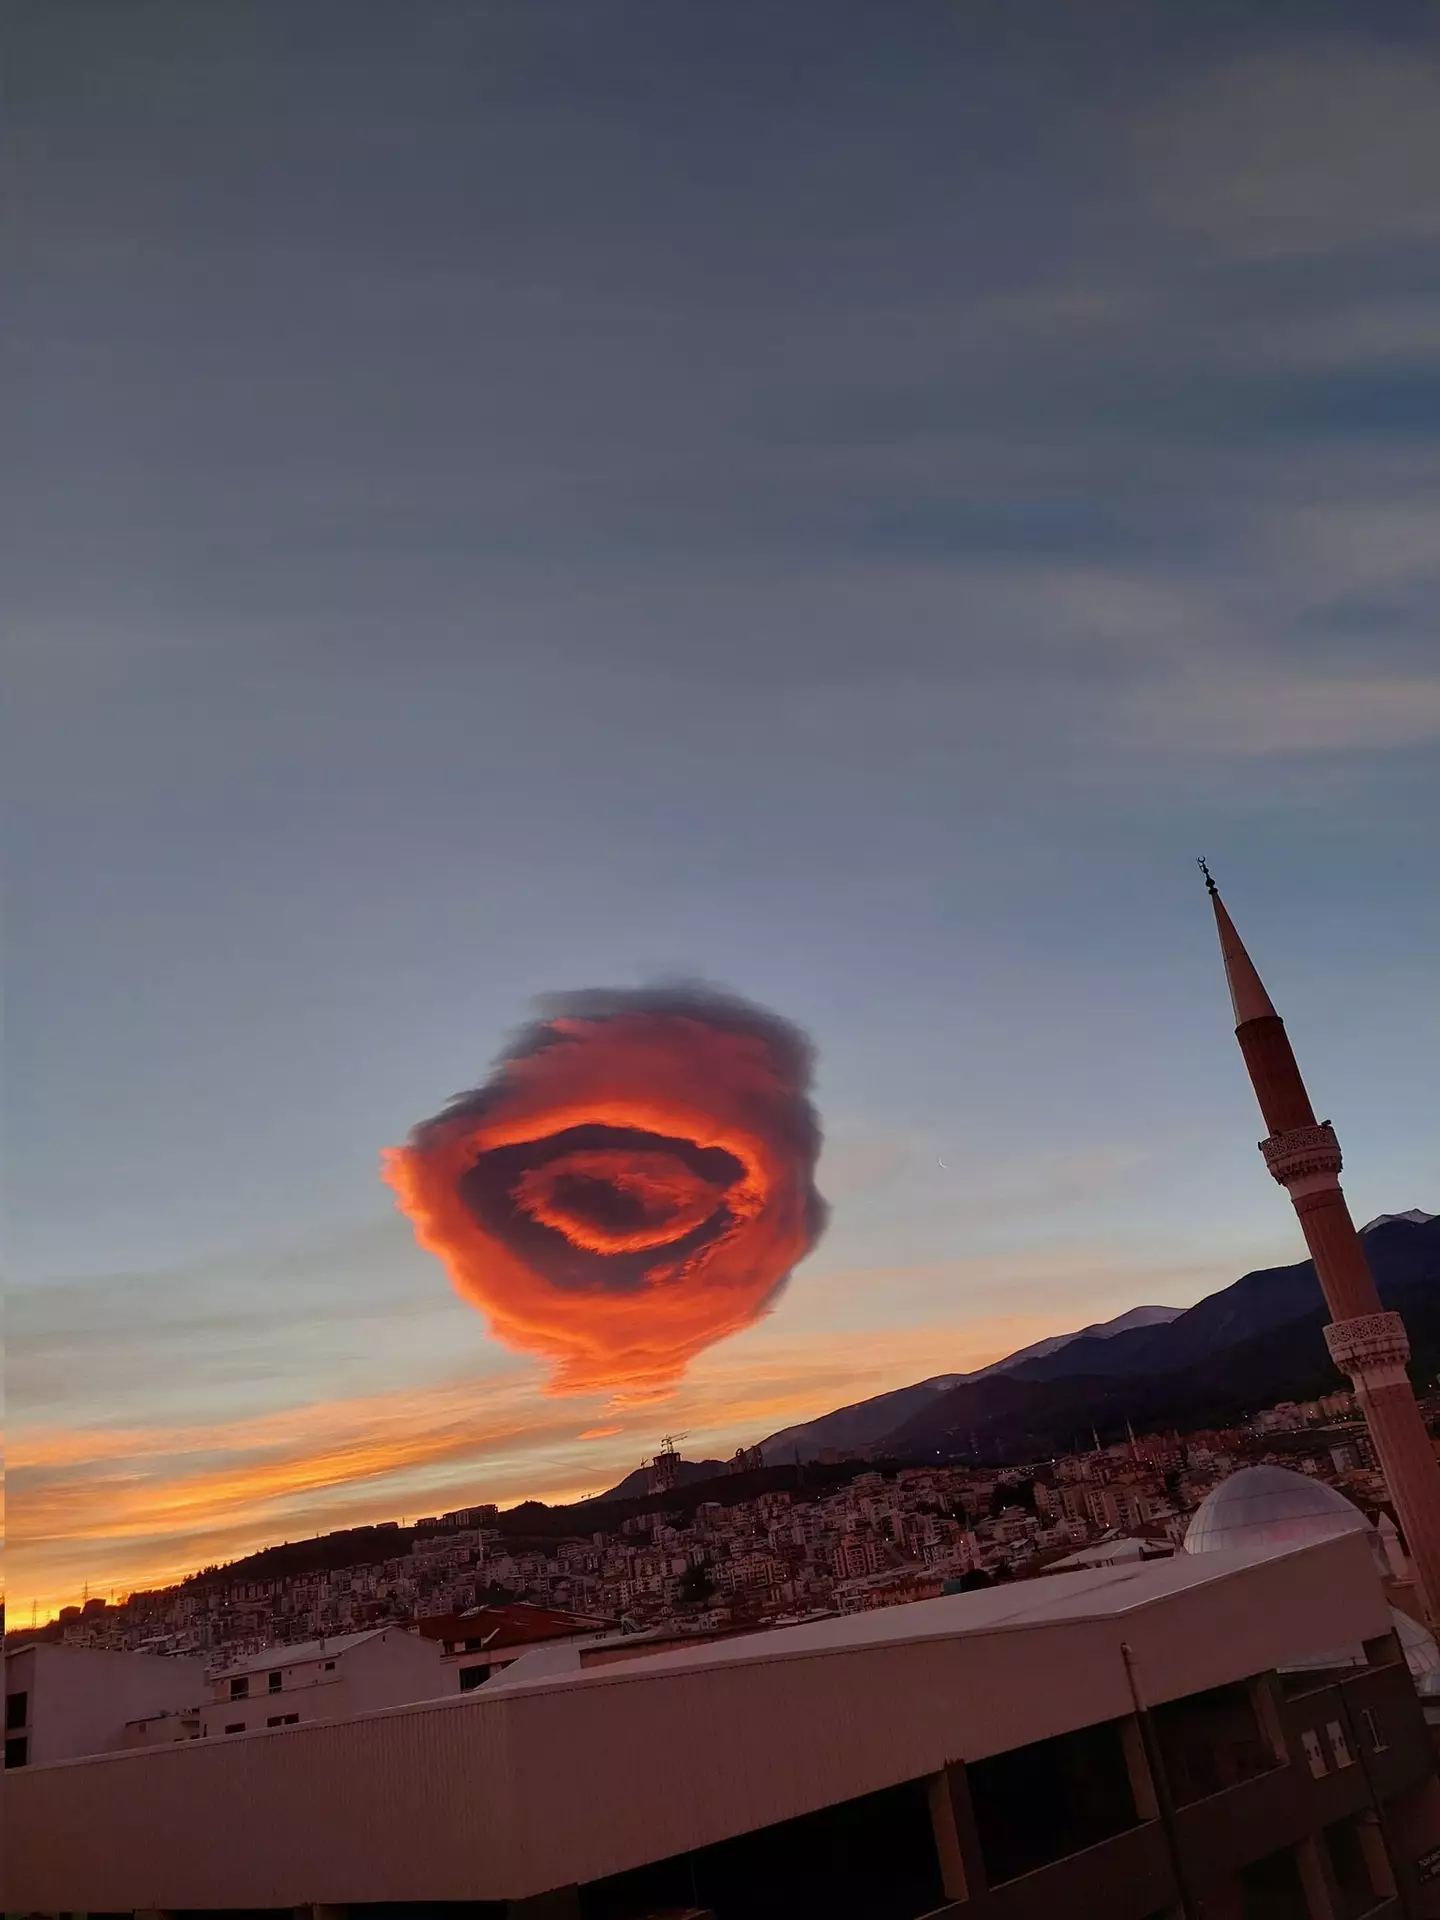 The lenticular cloud was spotted in Turkey.